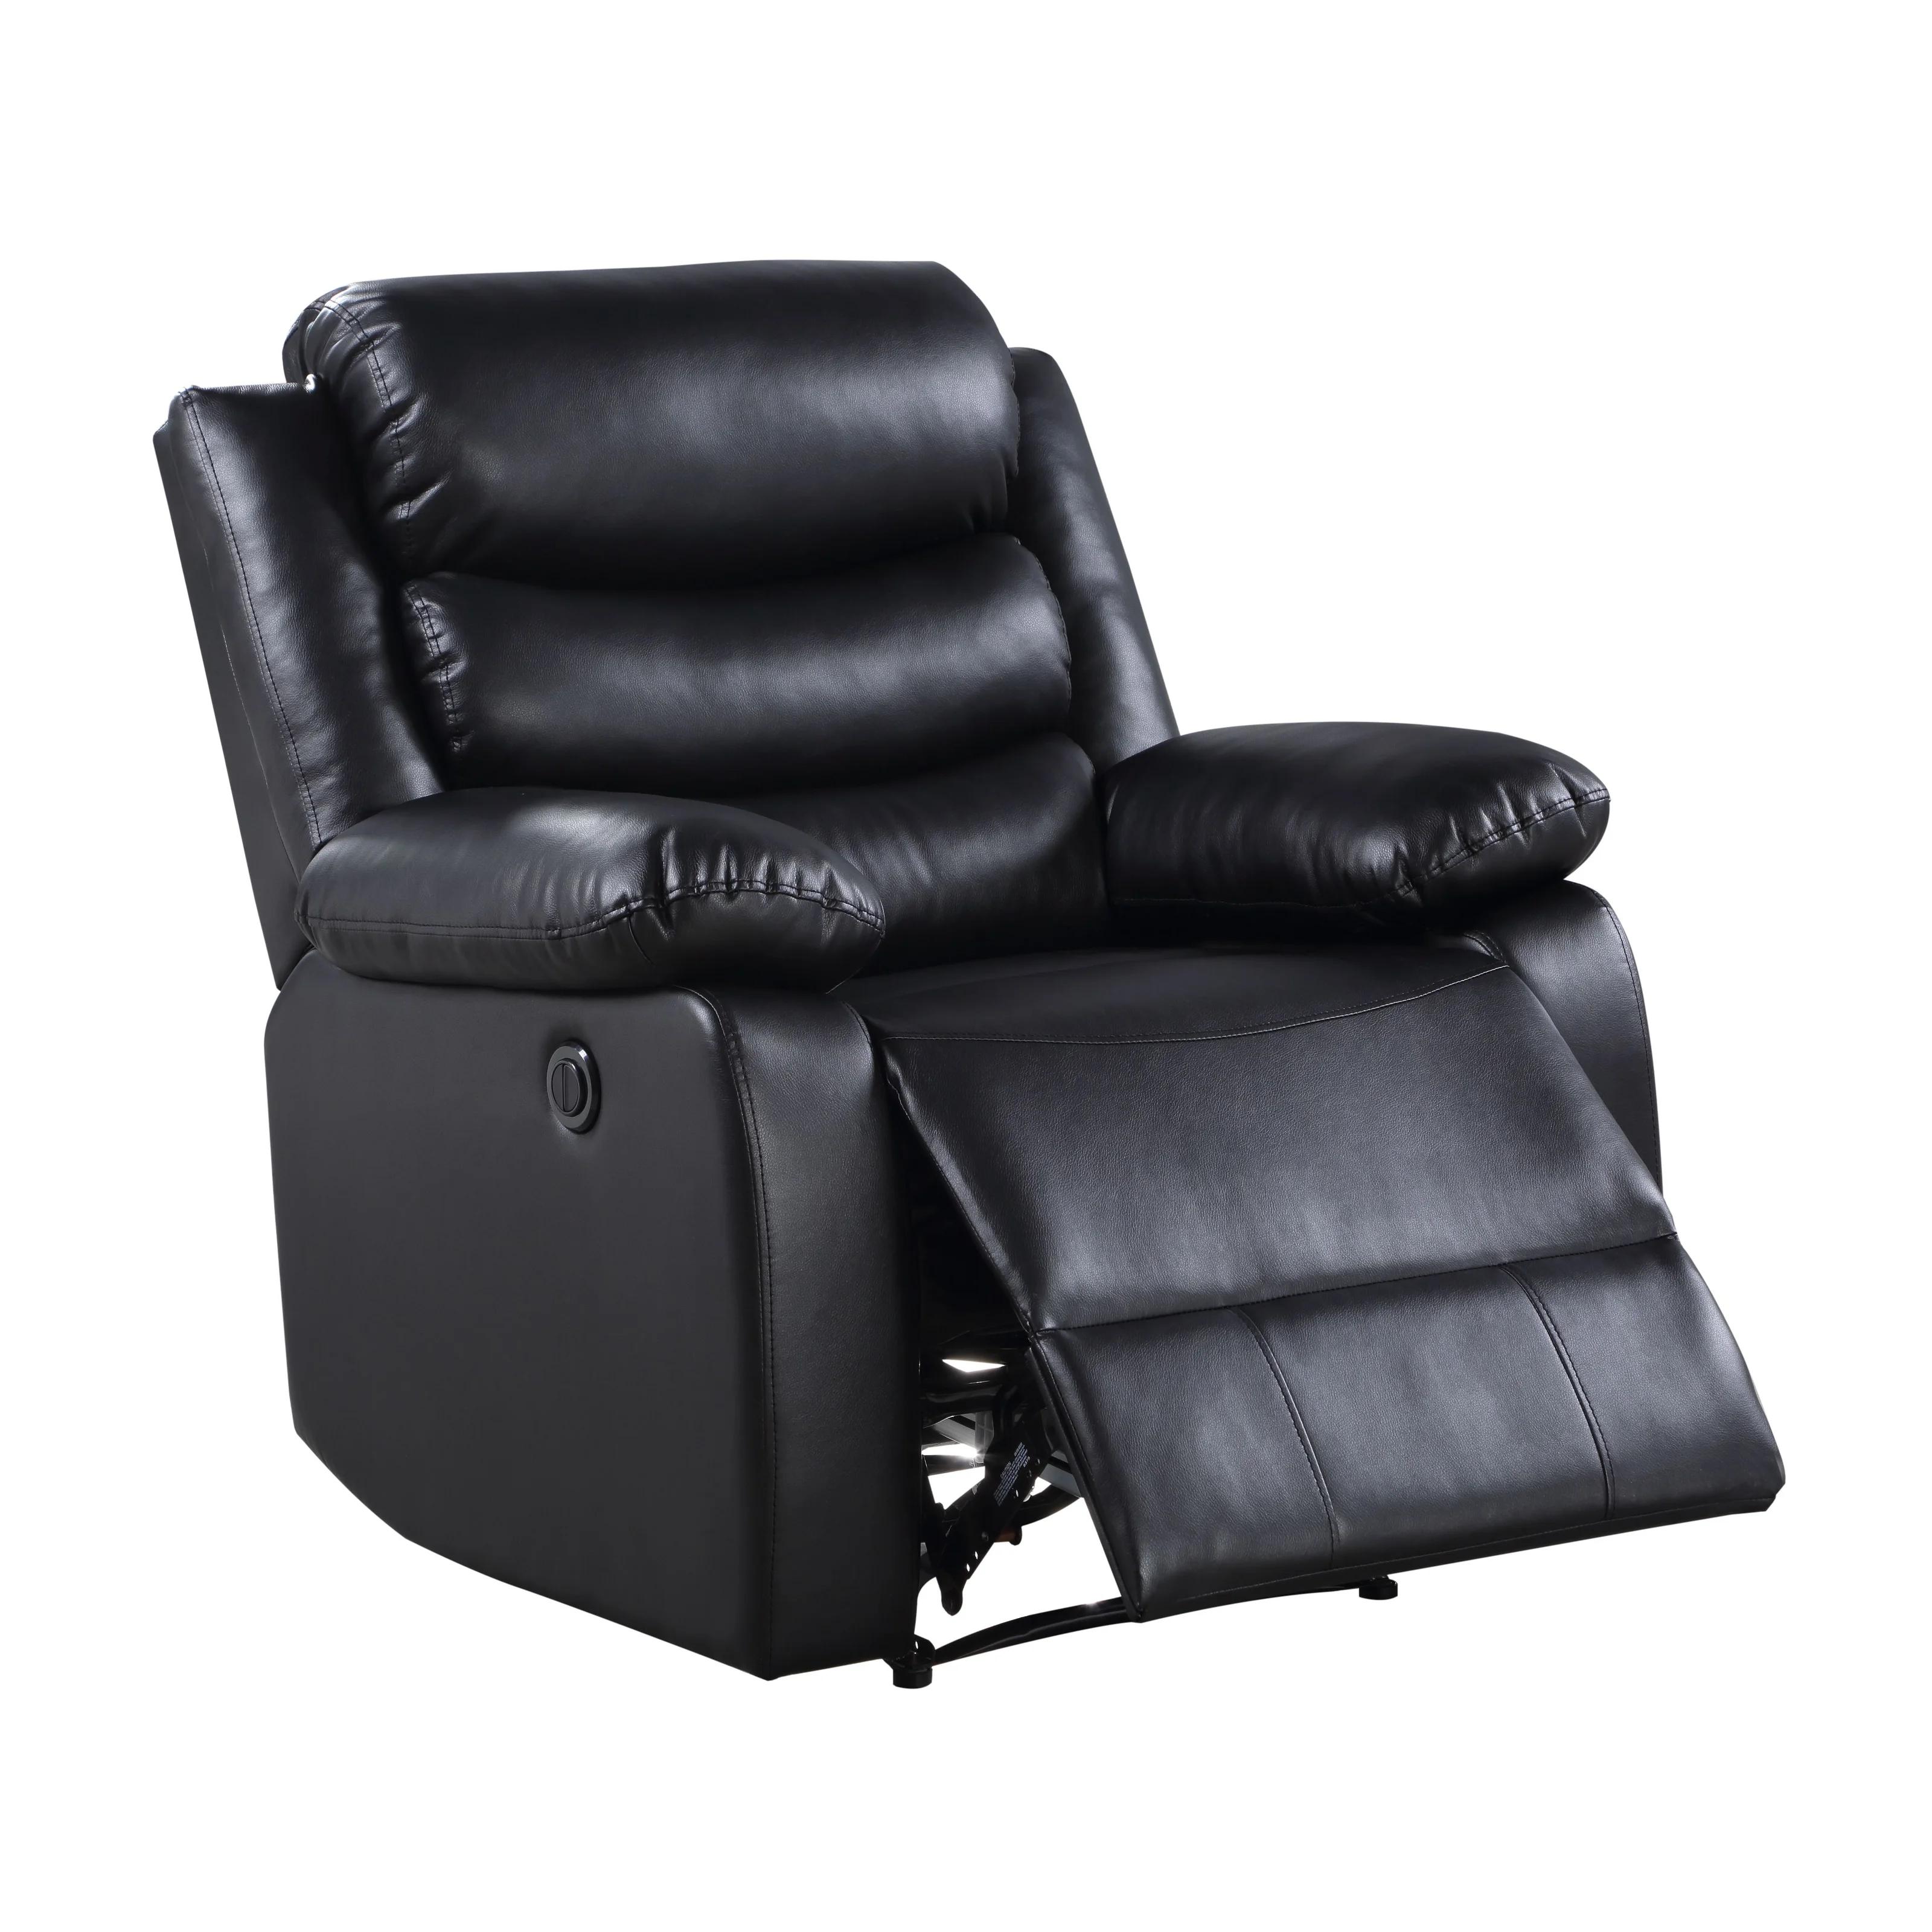 

    
Contemporary Black Faux Leather PU Recliner by Acme Eilbra 56910
